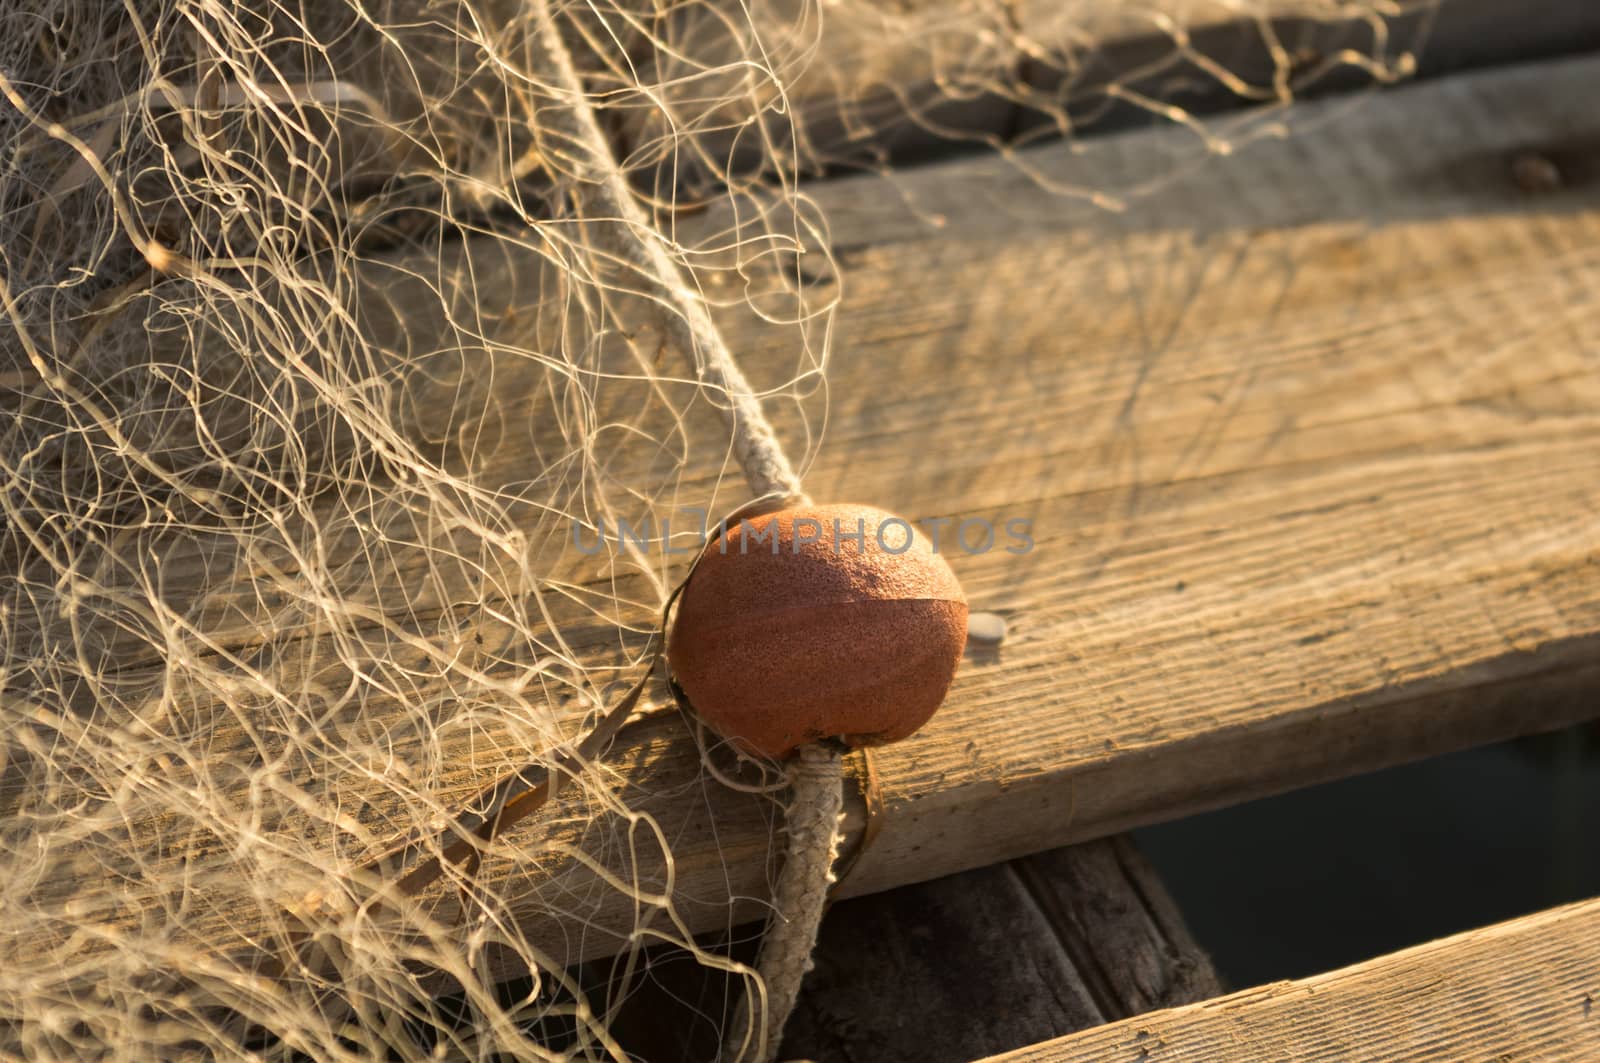 Fishing net with floats resting on wooden jetty